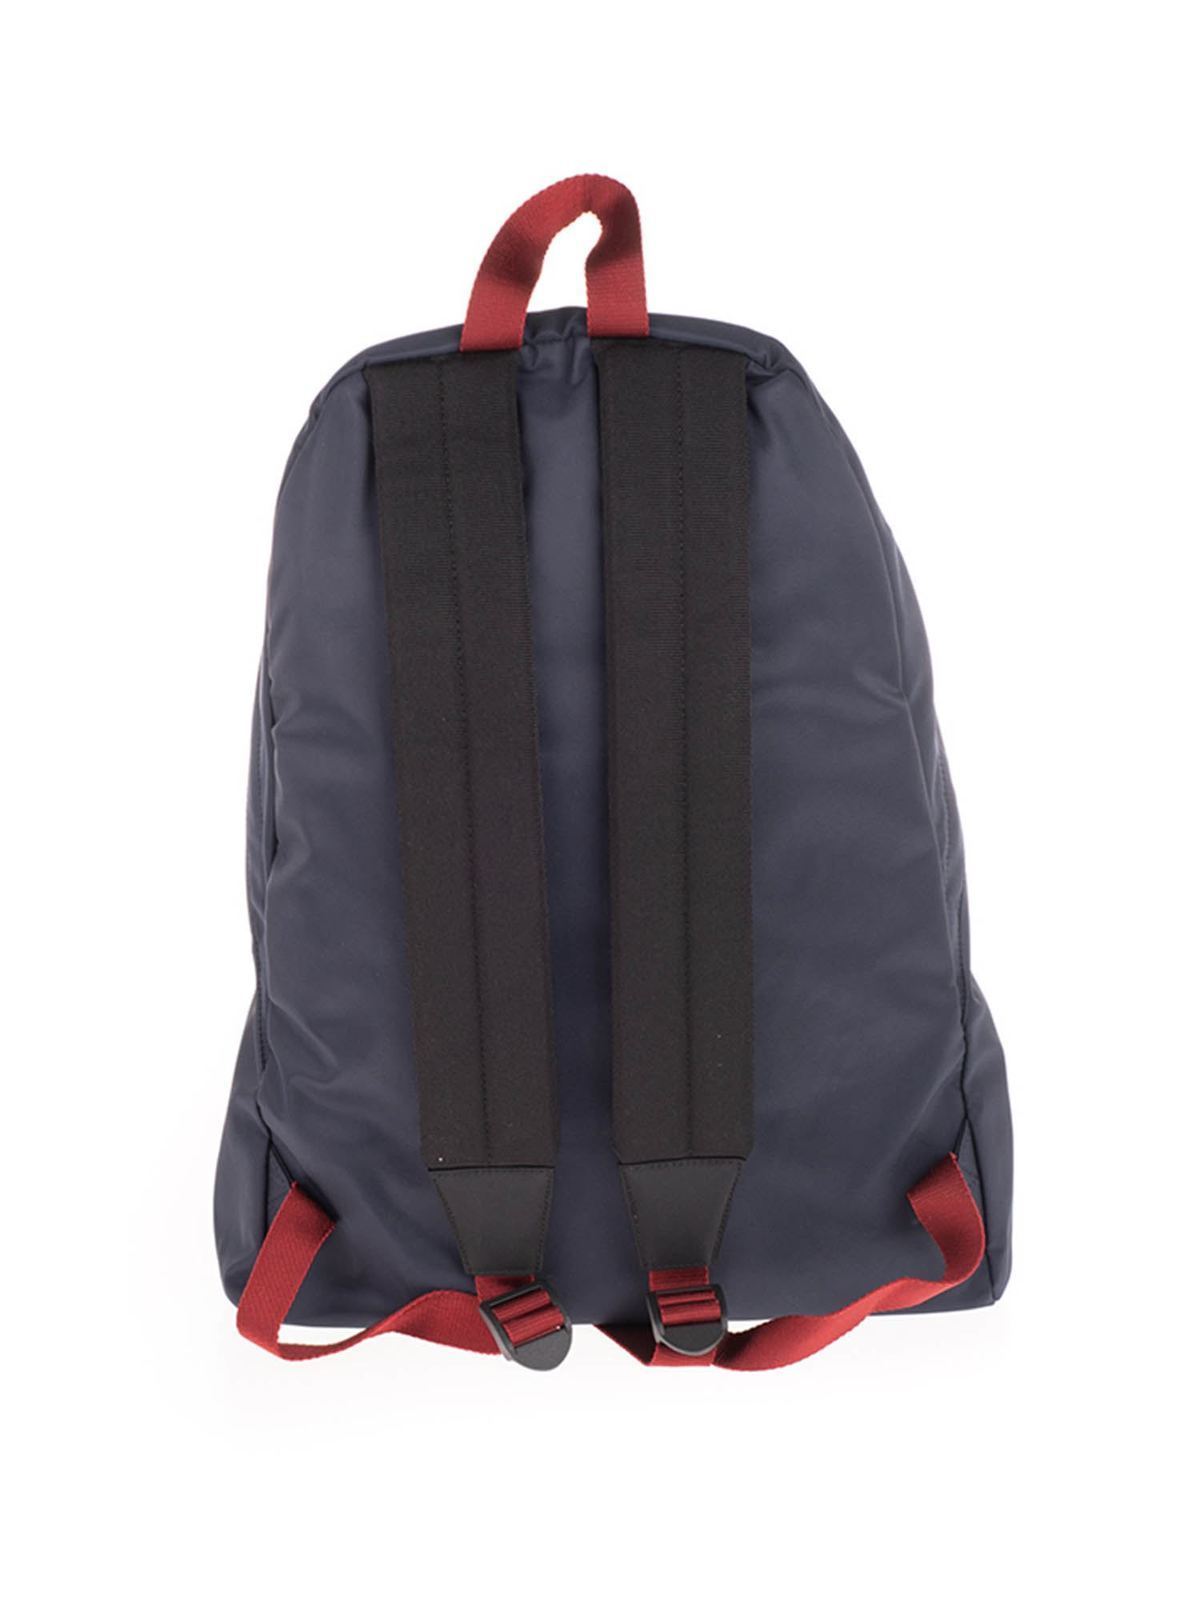 Backpacks Balenciaga - Wheel backpack in navy blue and red 